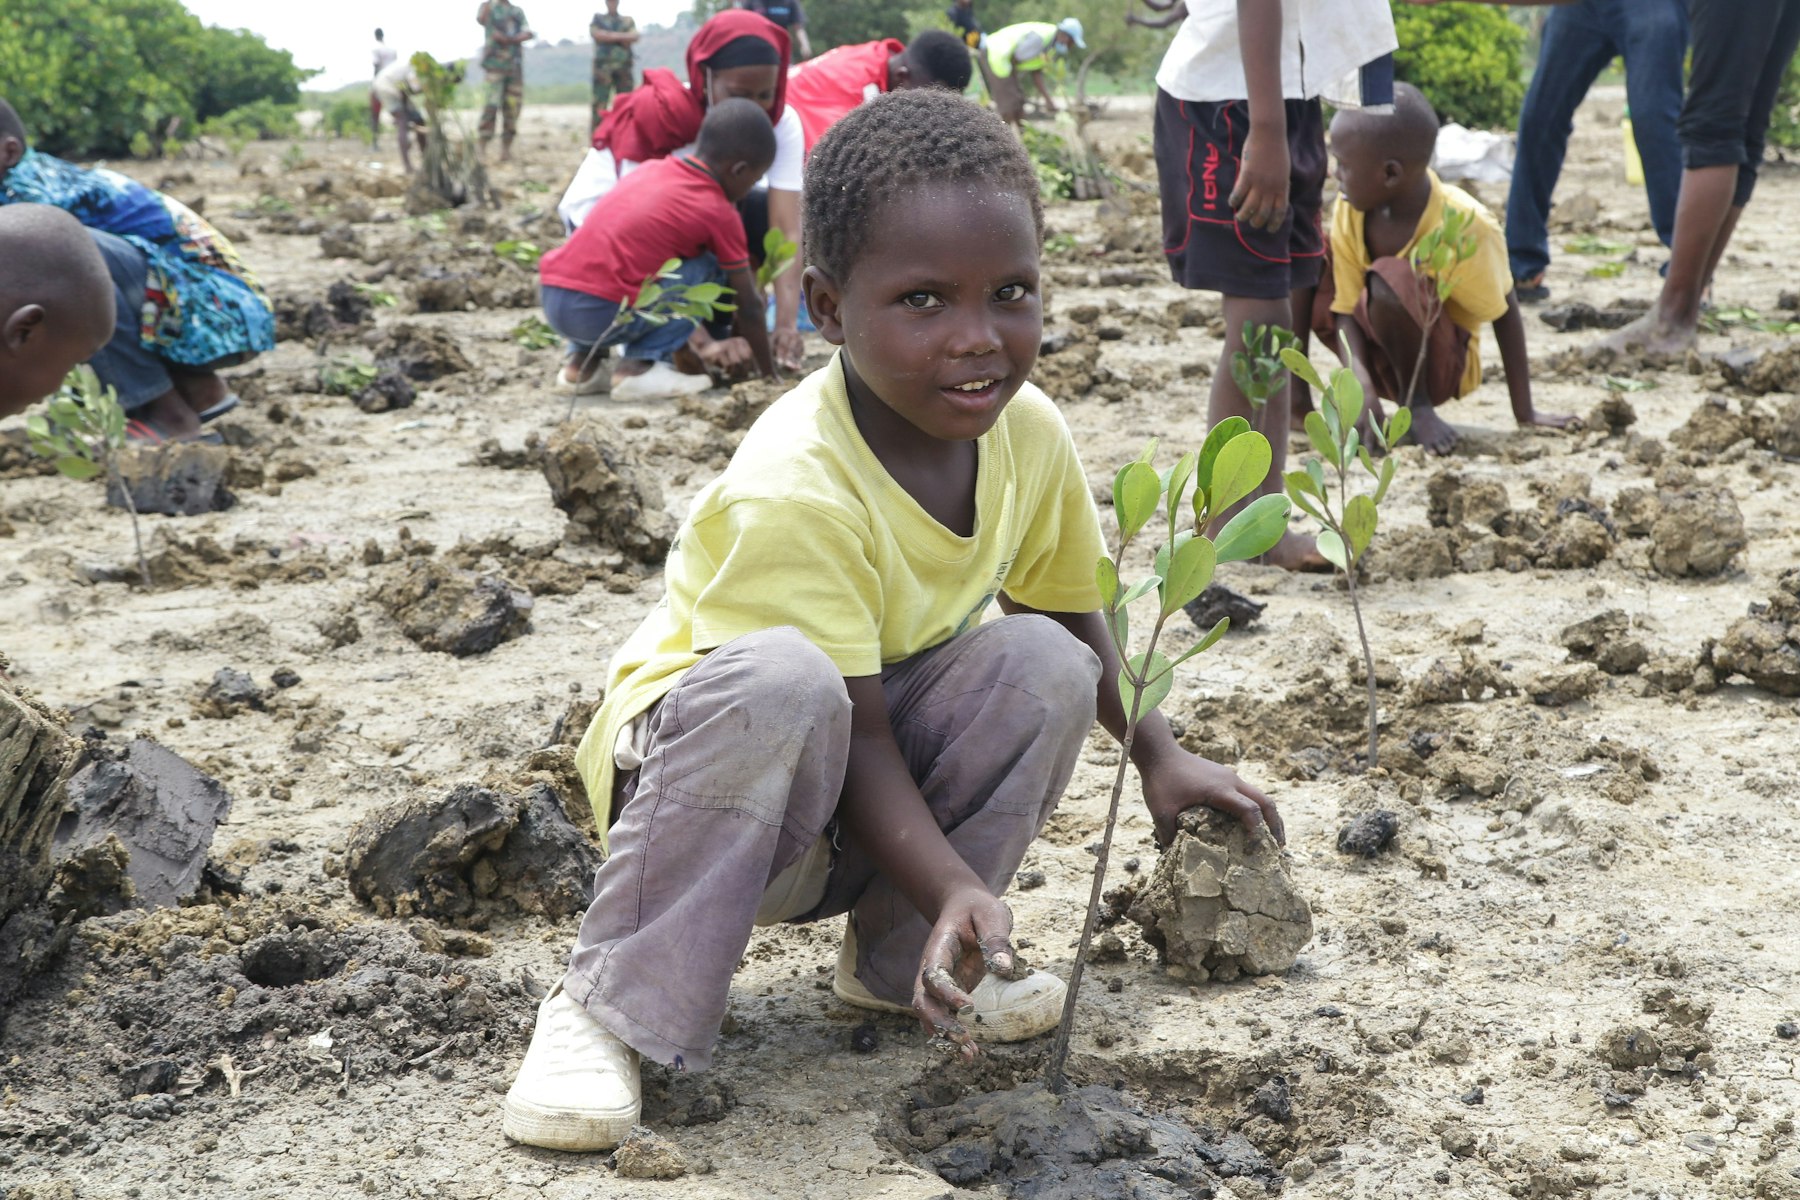 In Mombasa, Kenya, a young boy “plants his age” – the number of mangrove seedlings equal to his years on Earth.